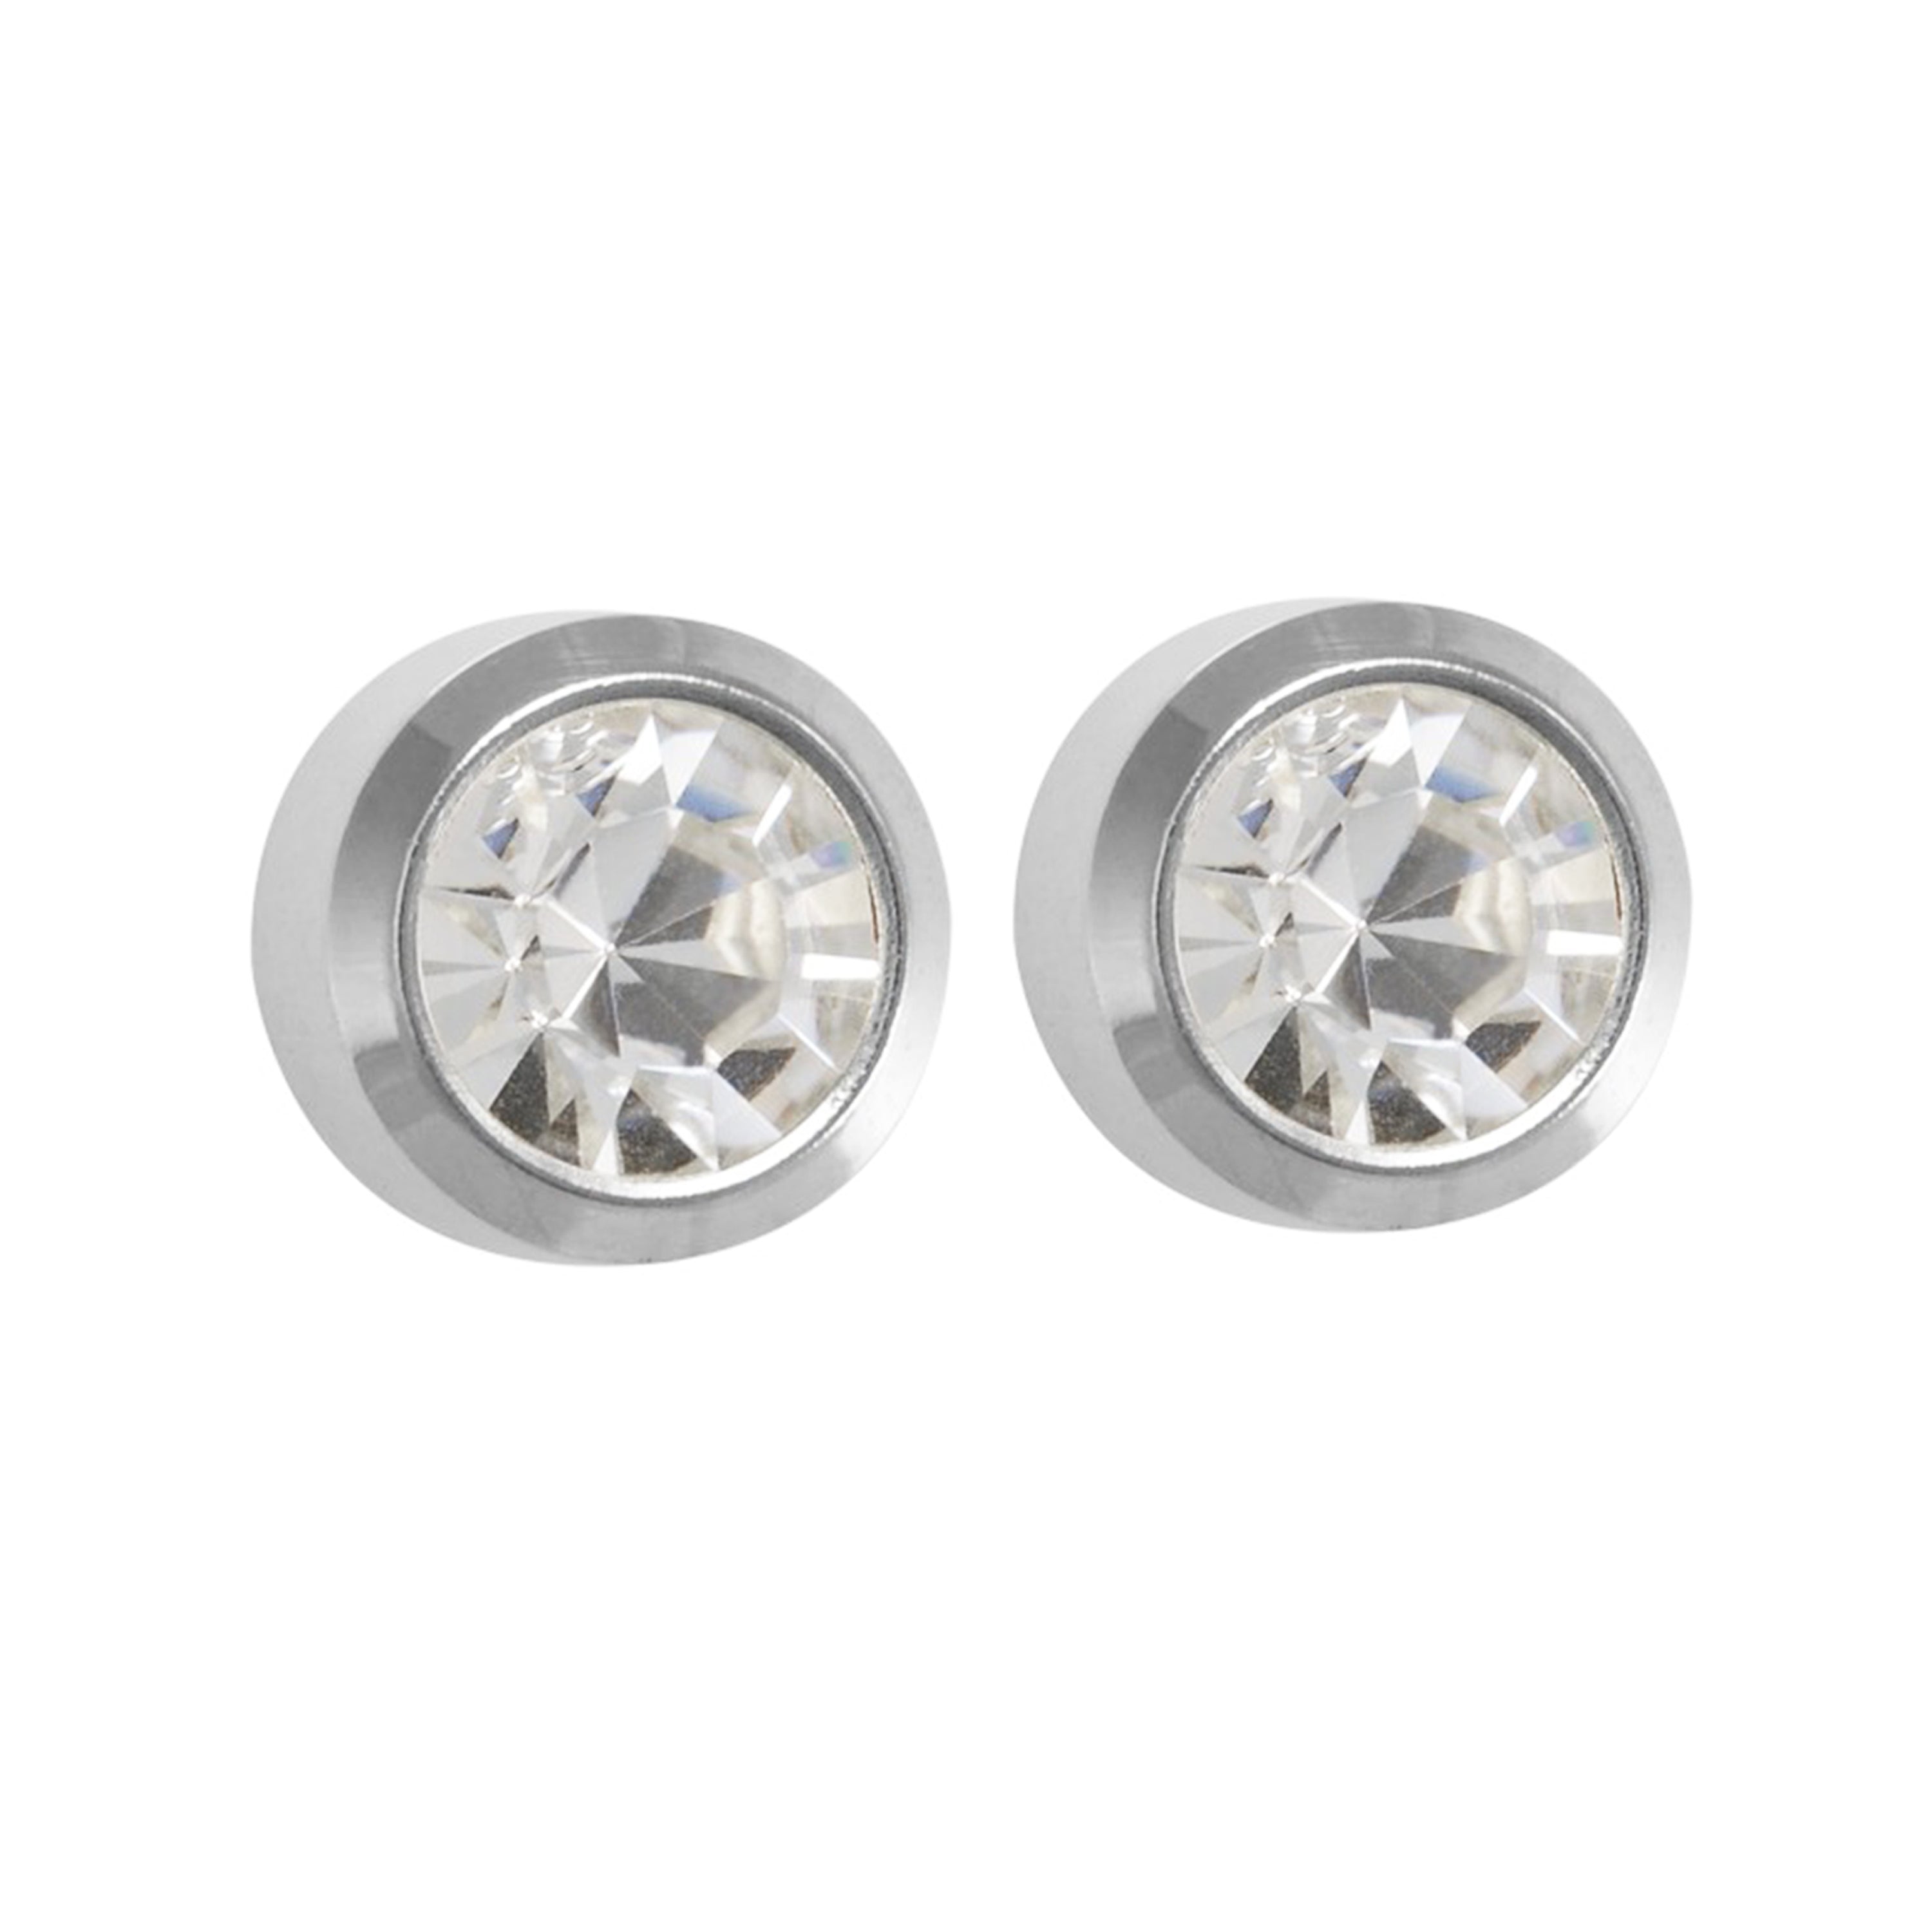 3MM April – Crystal Bezel Allergy free Stainless Steel Ear Studs | MADE IN USA | Ideal for everyday wear